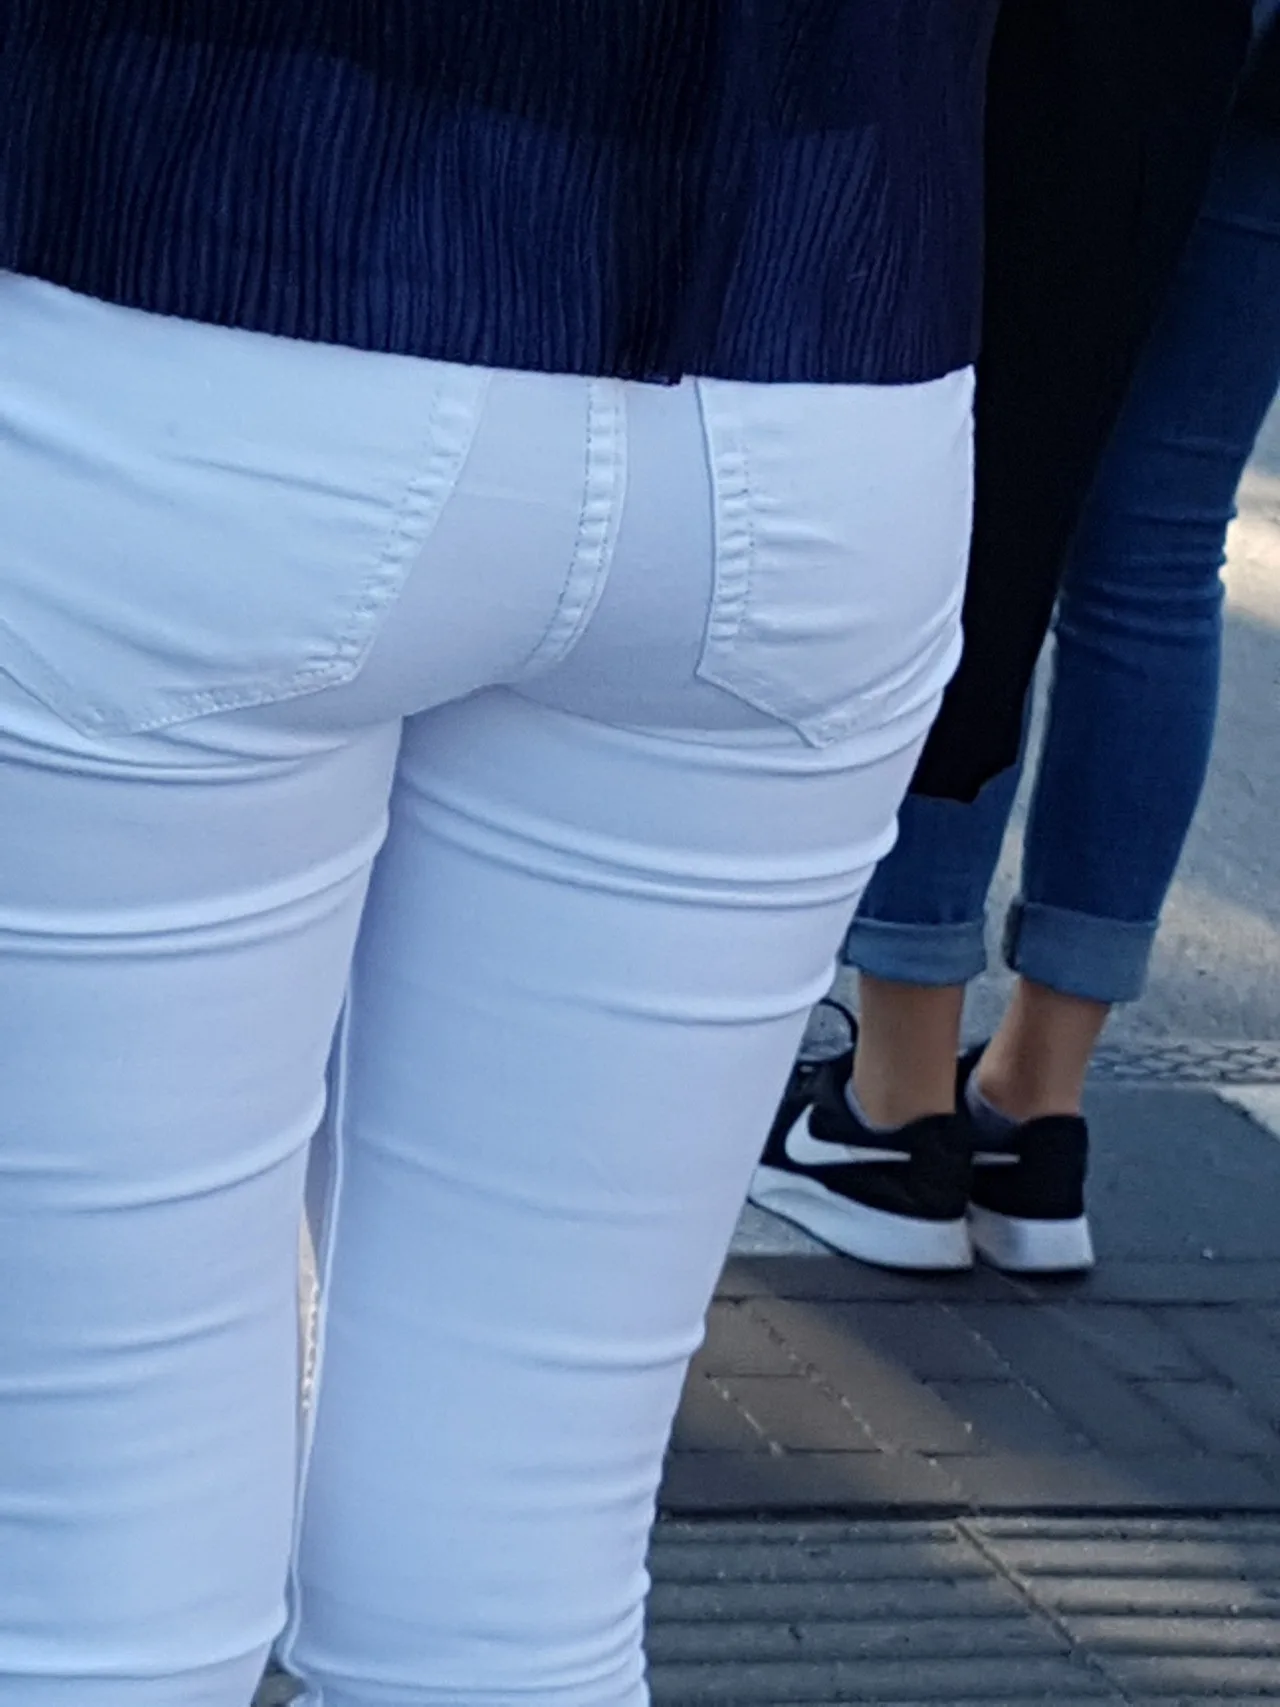 Sexy tight ass in tight white jeans.